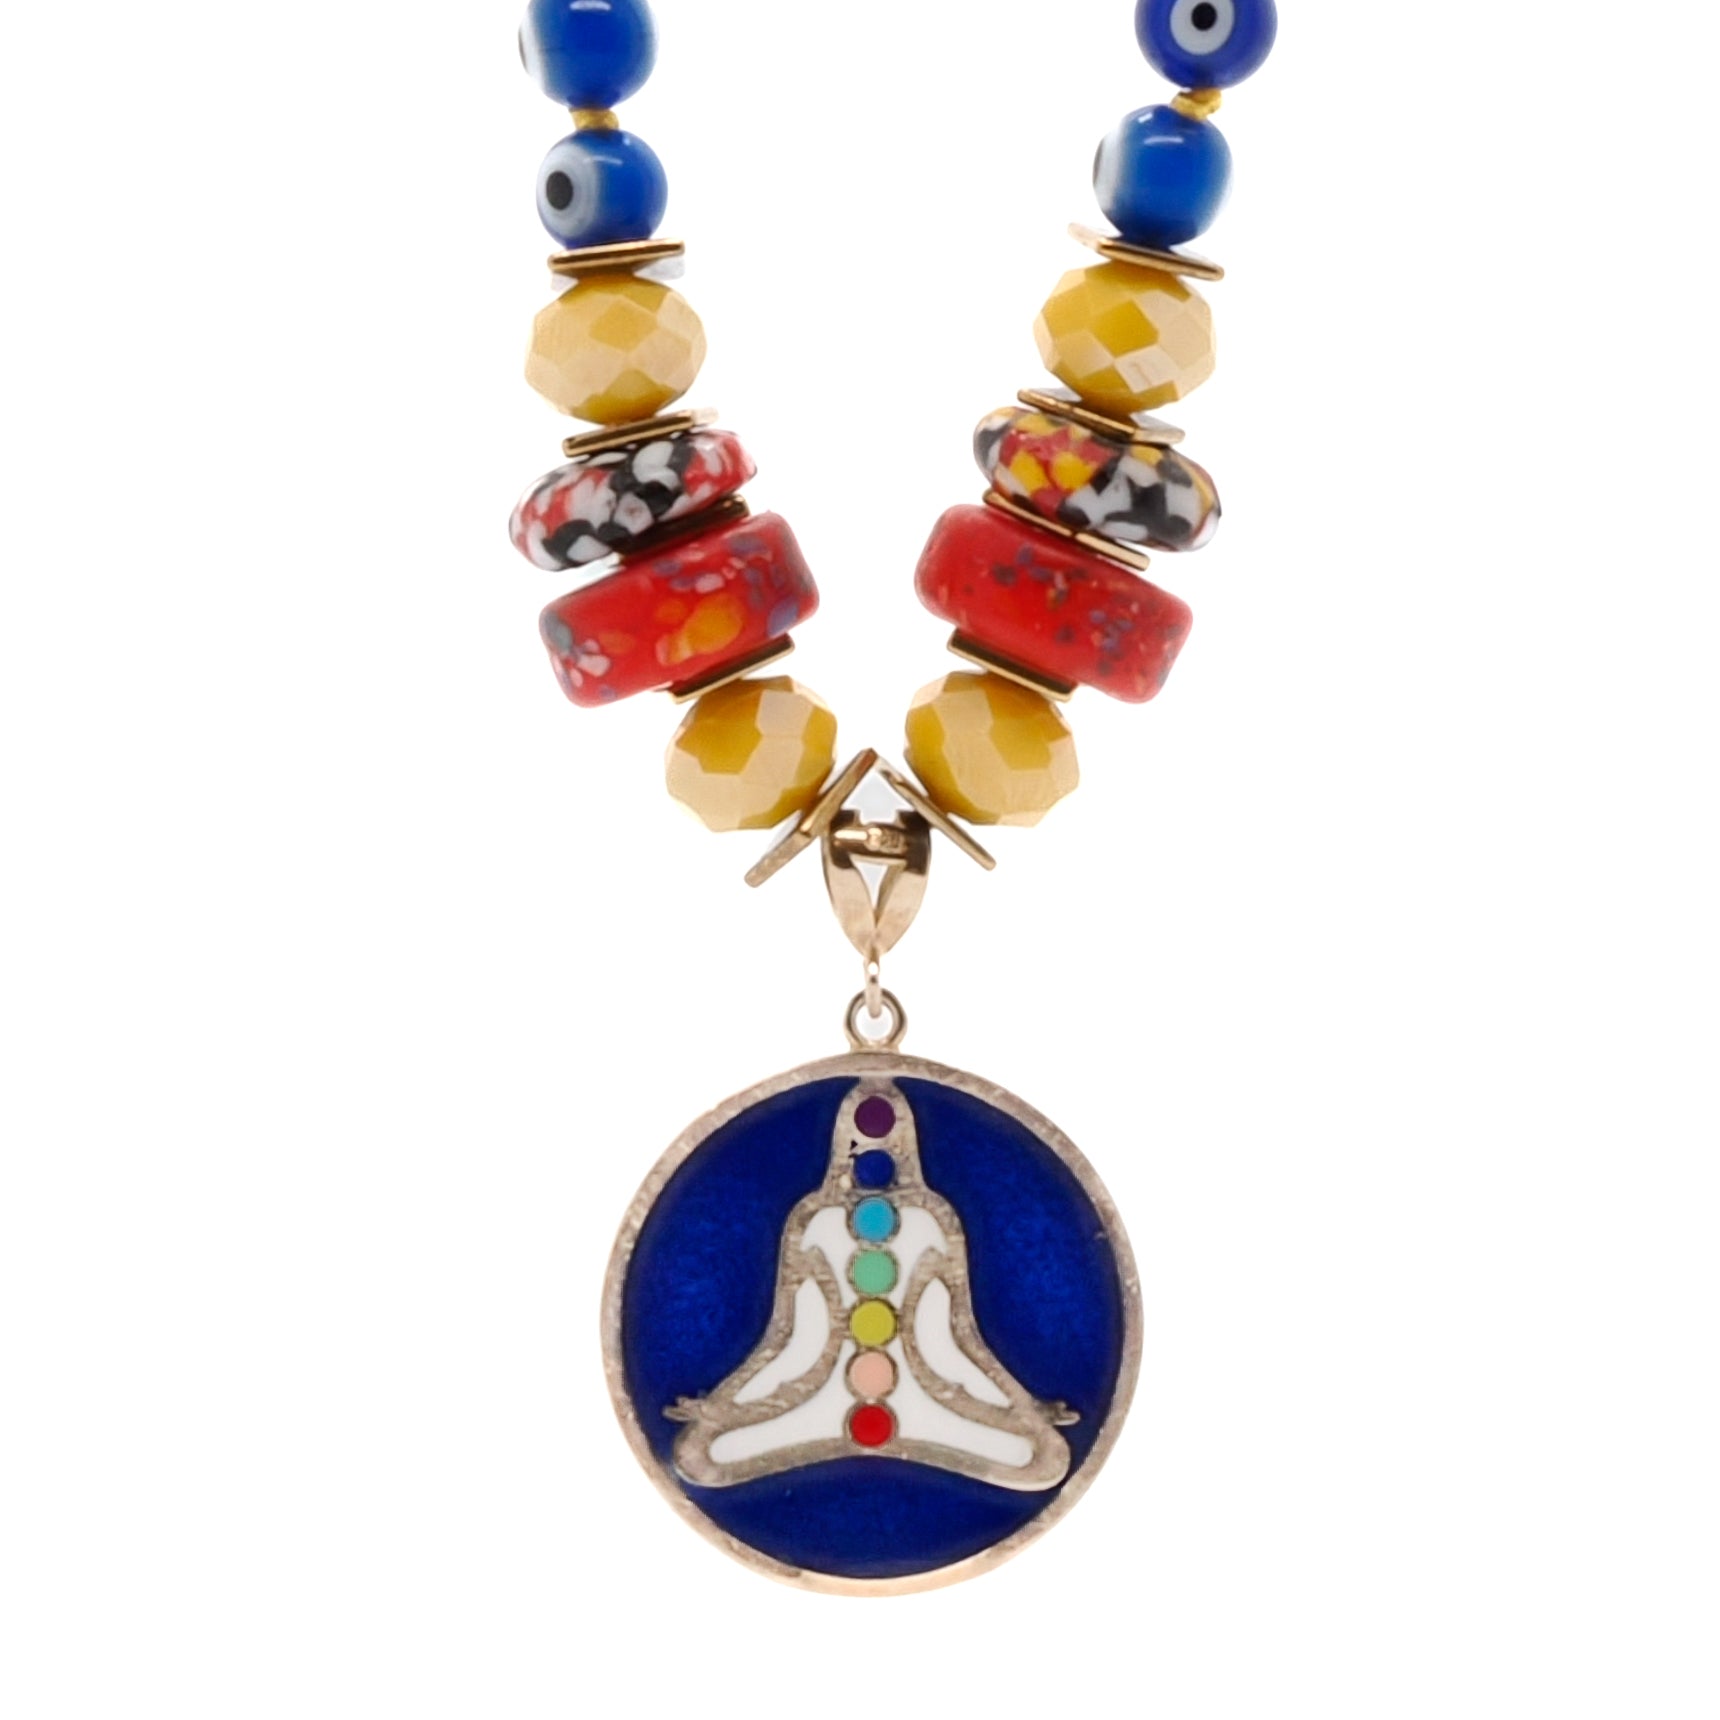 A powerful and protective handmade necklace featuring evil eye beads, colorful African beads, and Nepal meditation beads. The necklace also showcases a 925 silver 14k gold plated chakra yoga pendant with colorful enamel, symbolizing the balance and alignment of the body&#39;s energy centers.